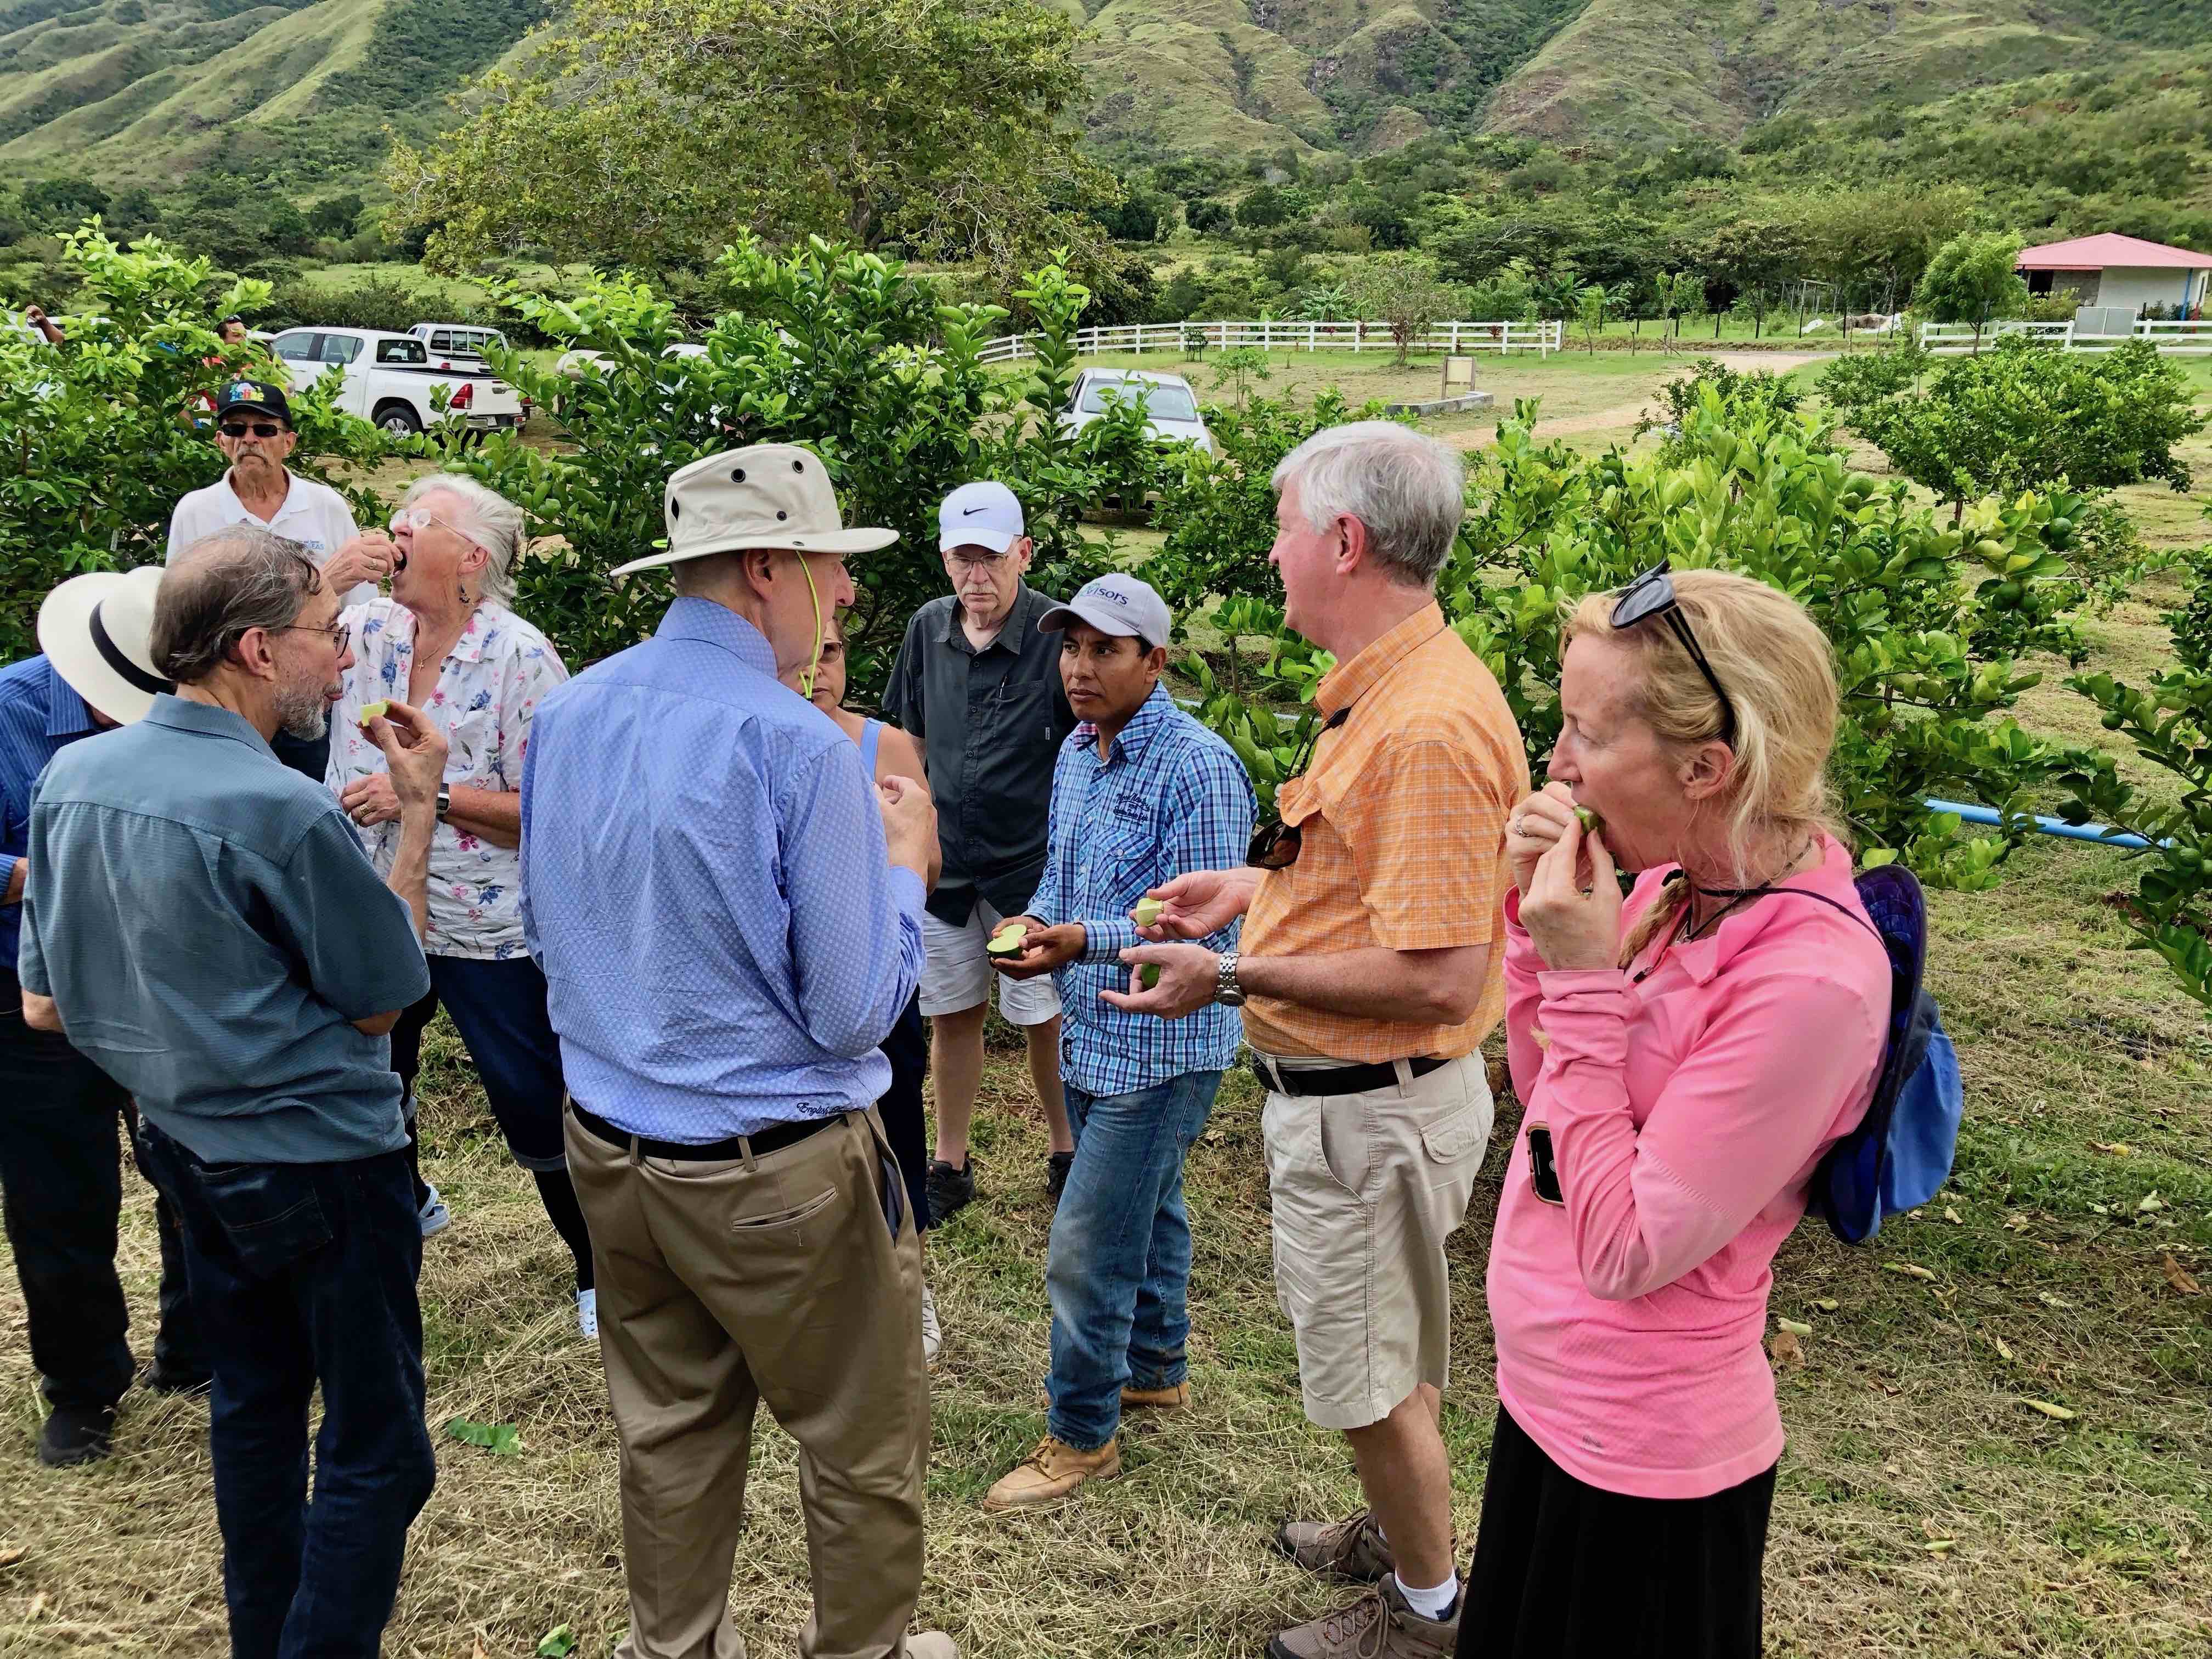 Real Estate Educator Evie Brooks continues to see a high interest in smart farming investments in Panama and hosts VIP Tours to visit the lime trees and more.